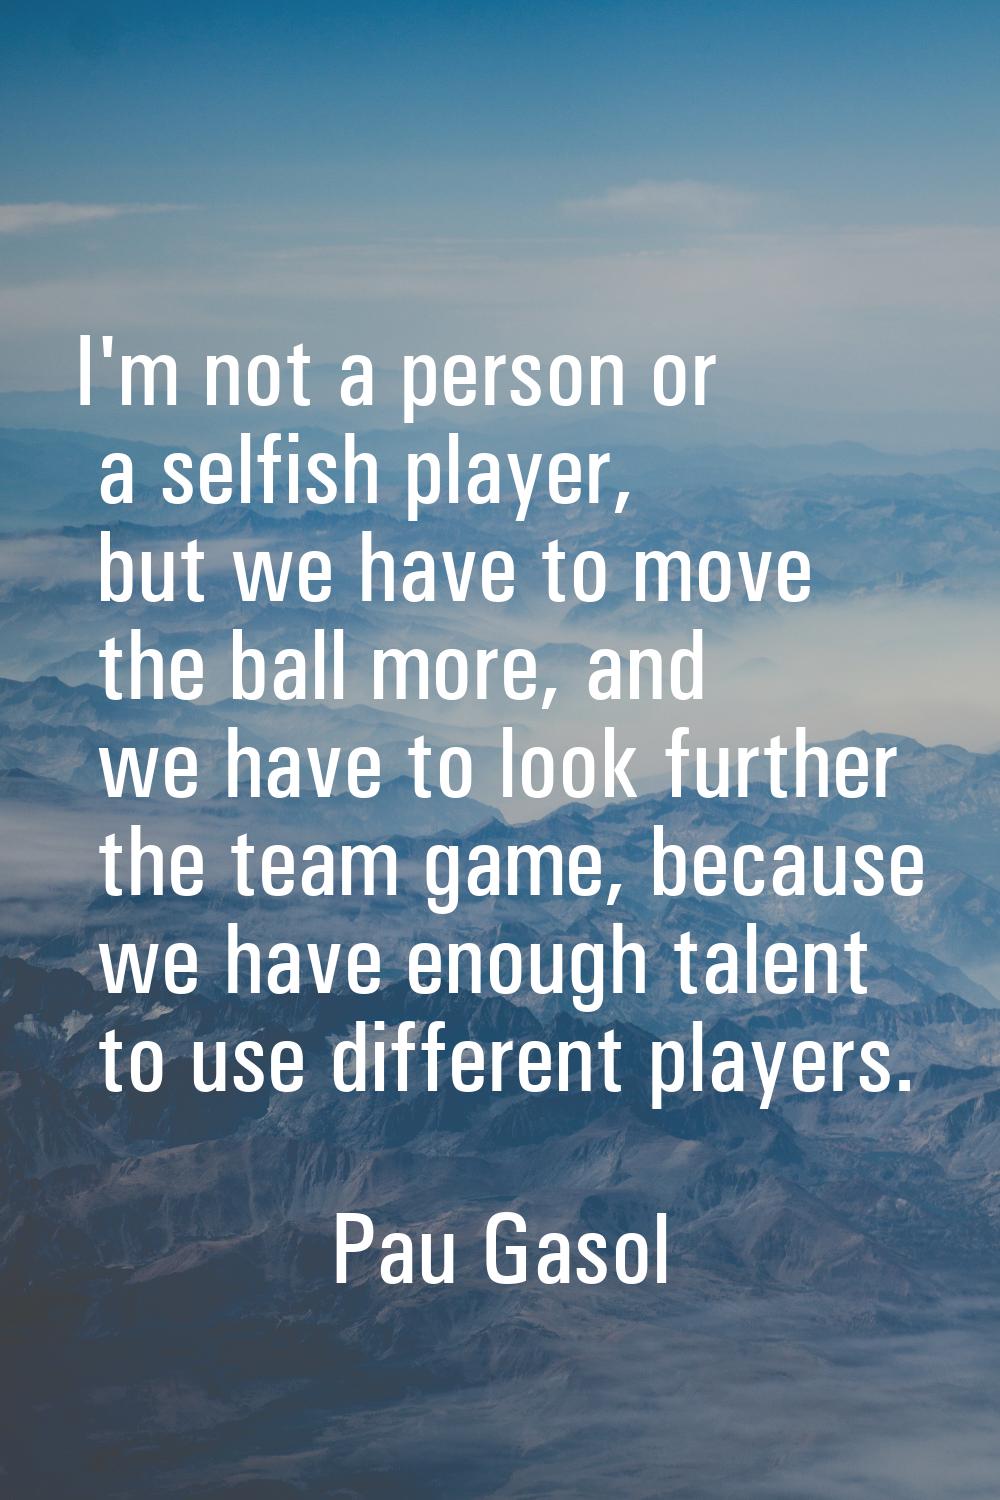 I'm not a person or a selfish player, but we have to move the ball more, and we have to look furthe